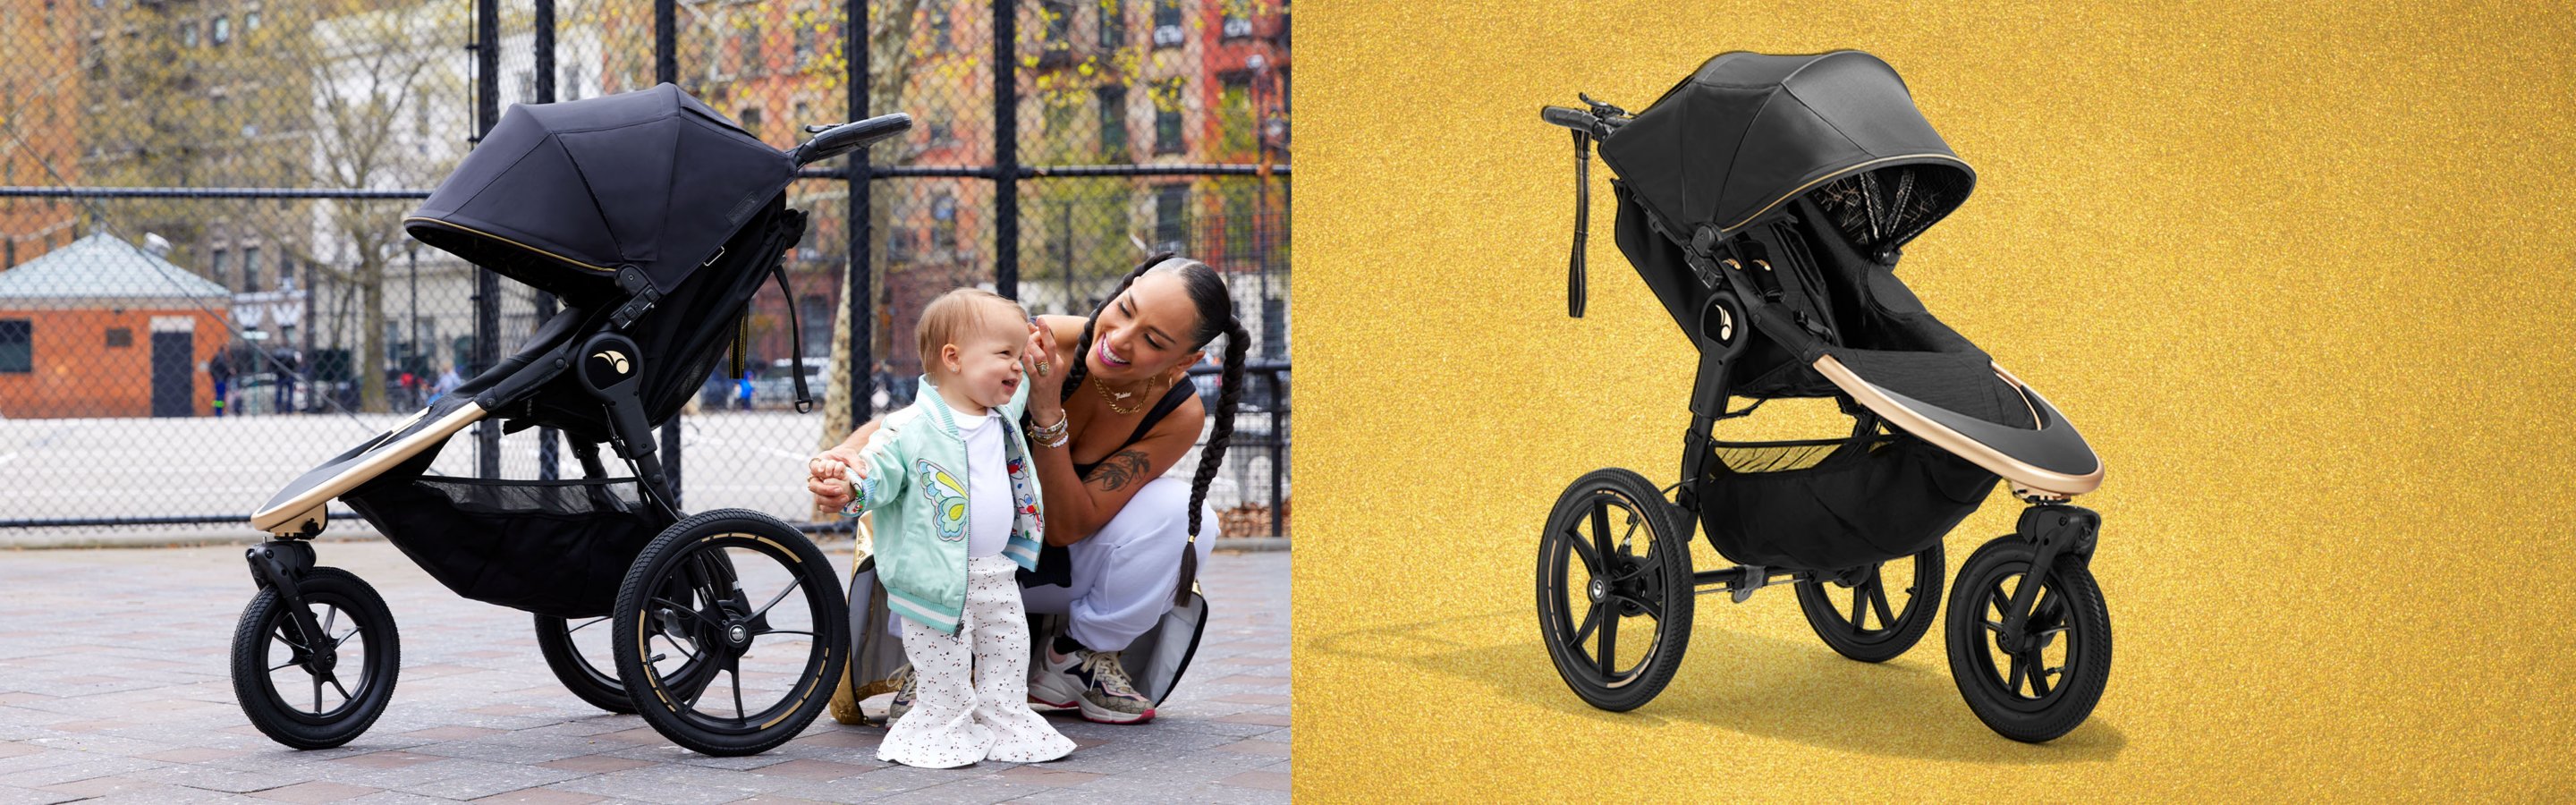 Baby Jogger: Baby Strollers & Gear Designed Fit Life